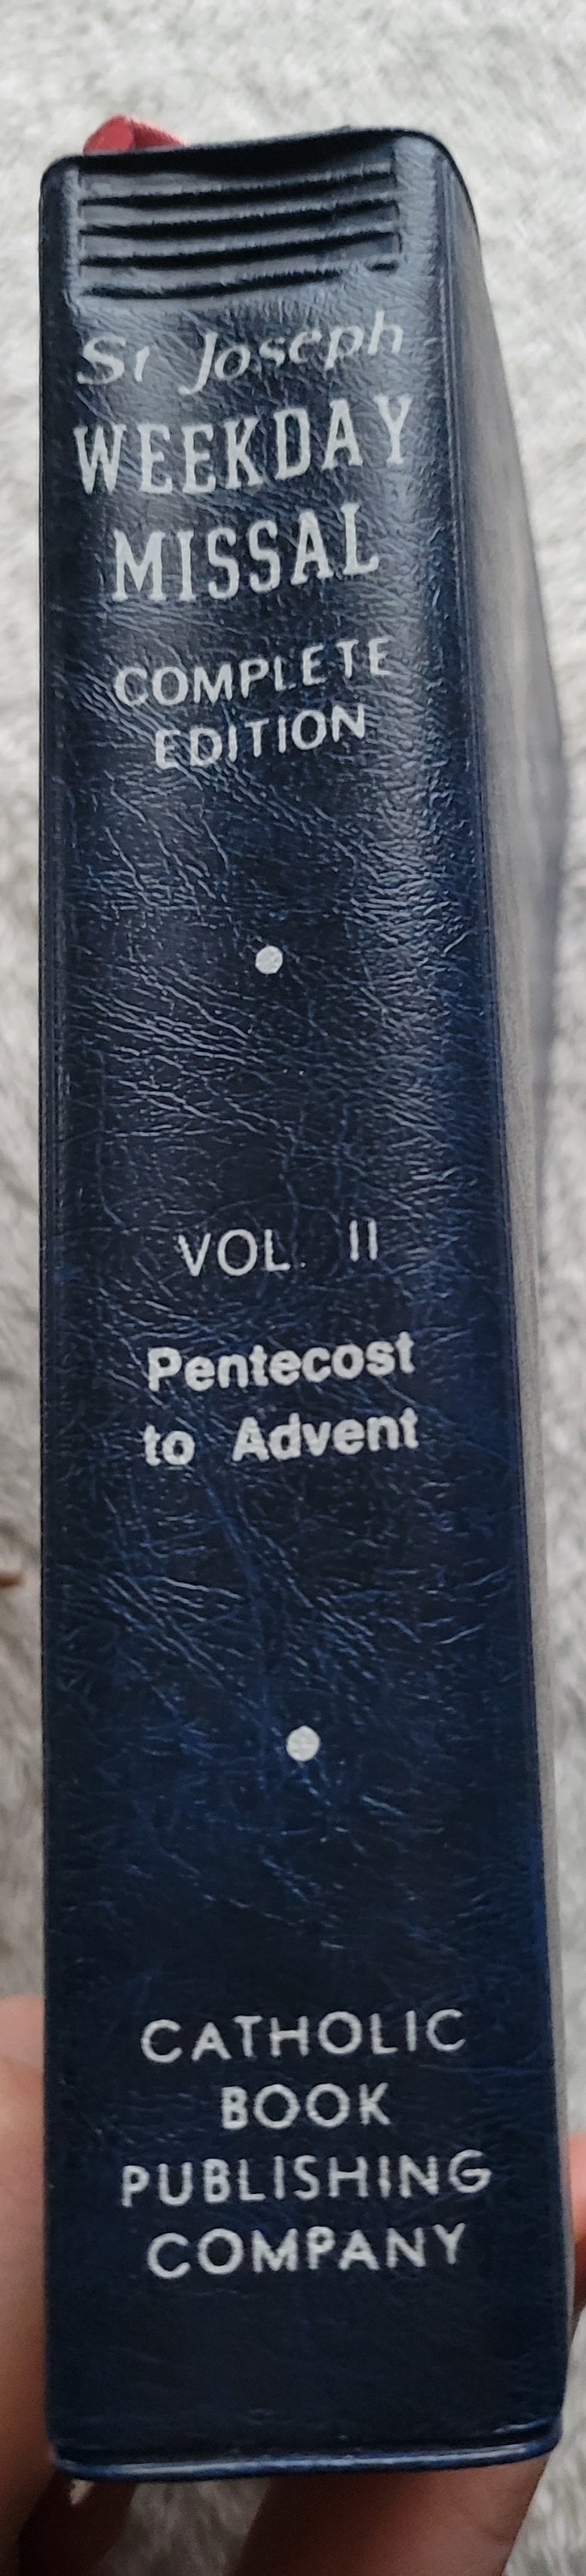 Vintage book for sale, "New....St. Joseph Weekday Missal Vol 2: Advent to Pentecost" Complete Edition, by the Catholic Book Publishing Company, "In accordance with Vatican II". View of spine.